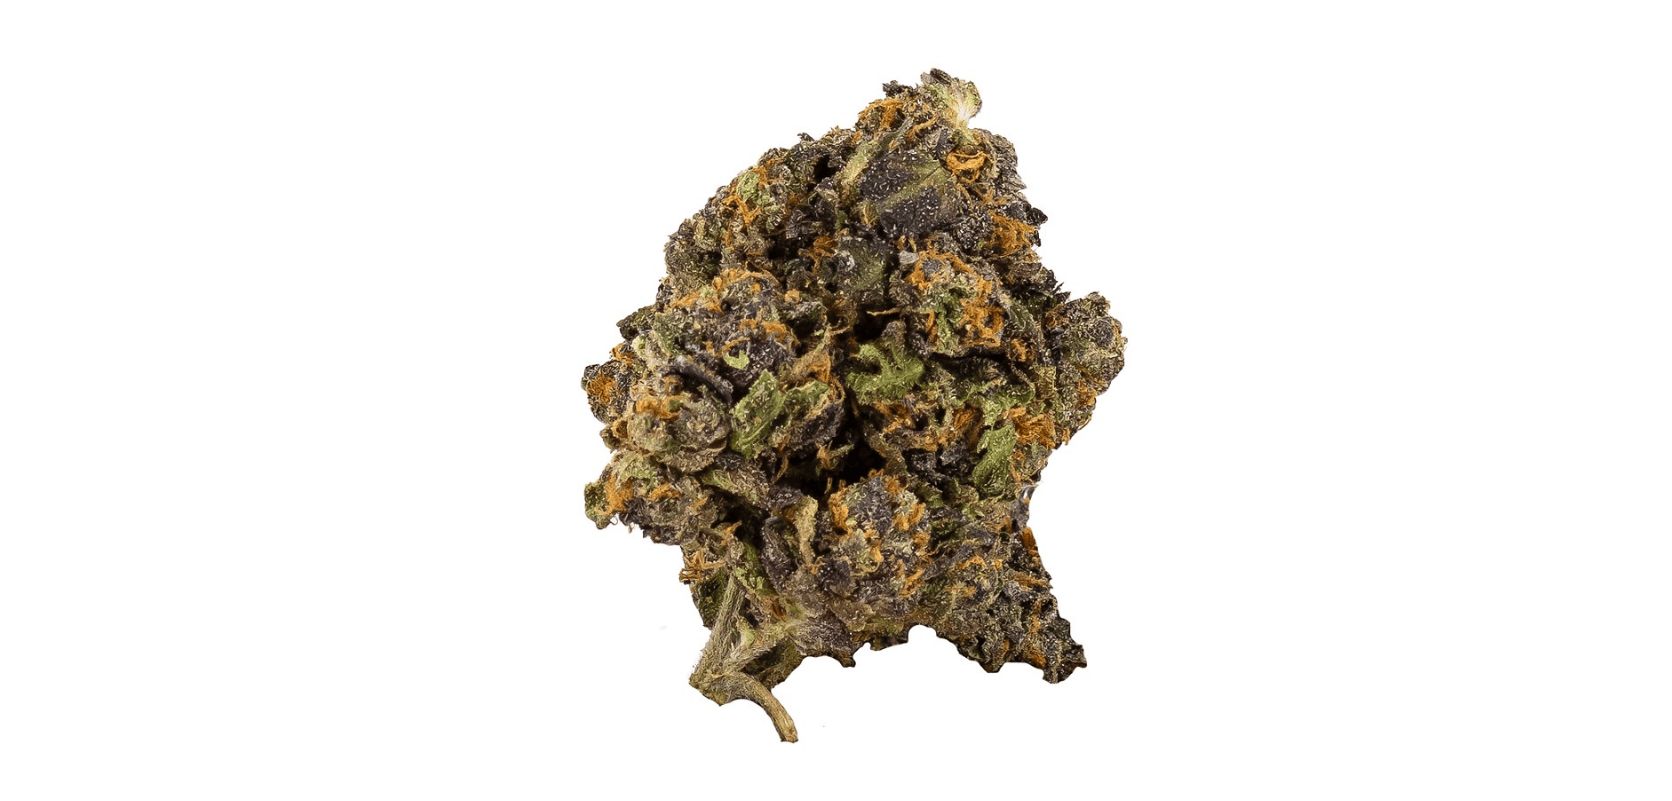 Many strains would be jealous of this strain's good looks. It has dense popcorn-shaped dark green buds accented with purple hues.